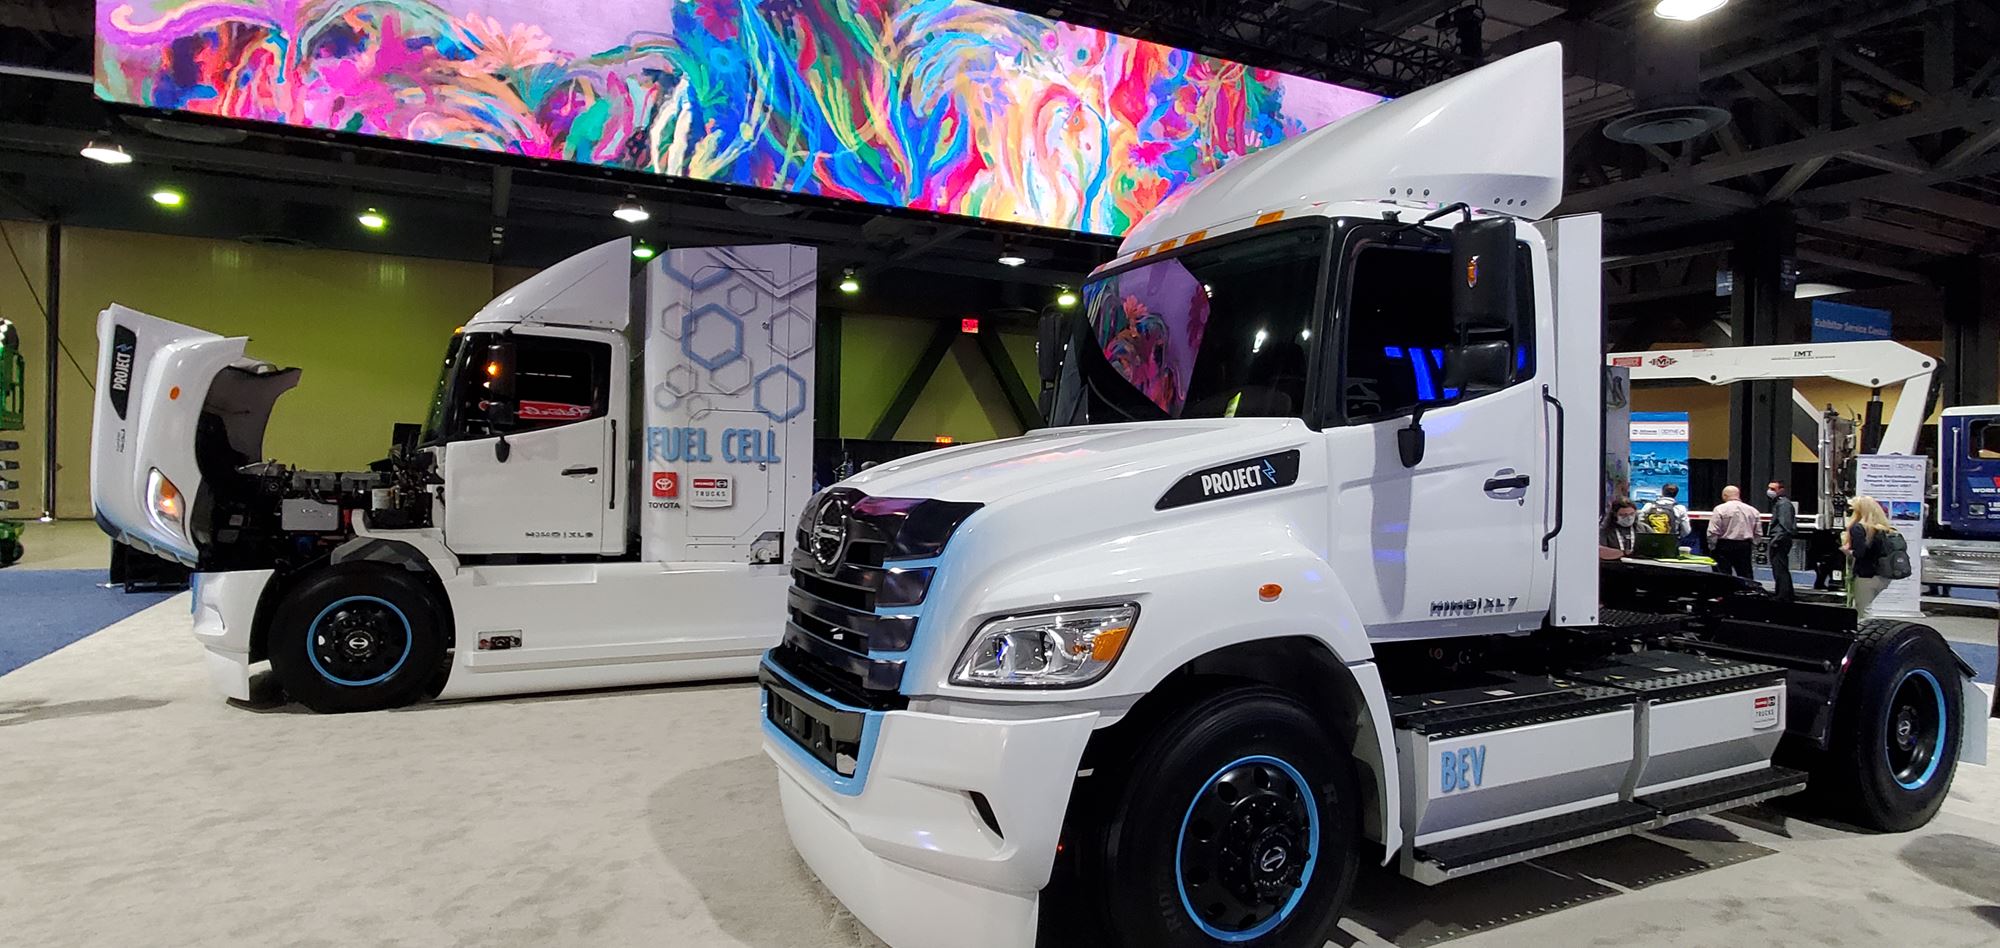 Pratt Miller zero-emission electric white semi trucks indoors at a tradeshow in partnership with Hino Motors and Toyota